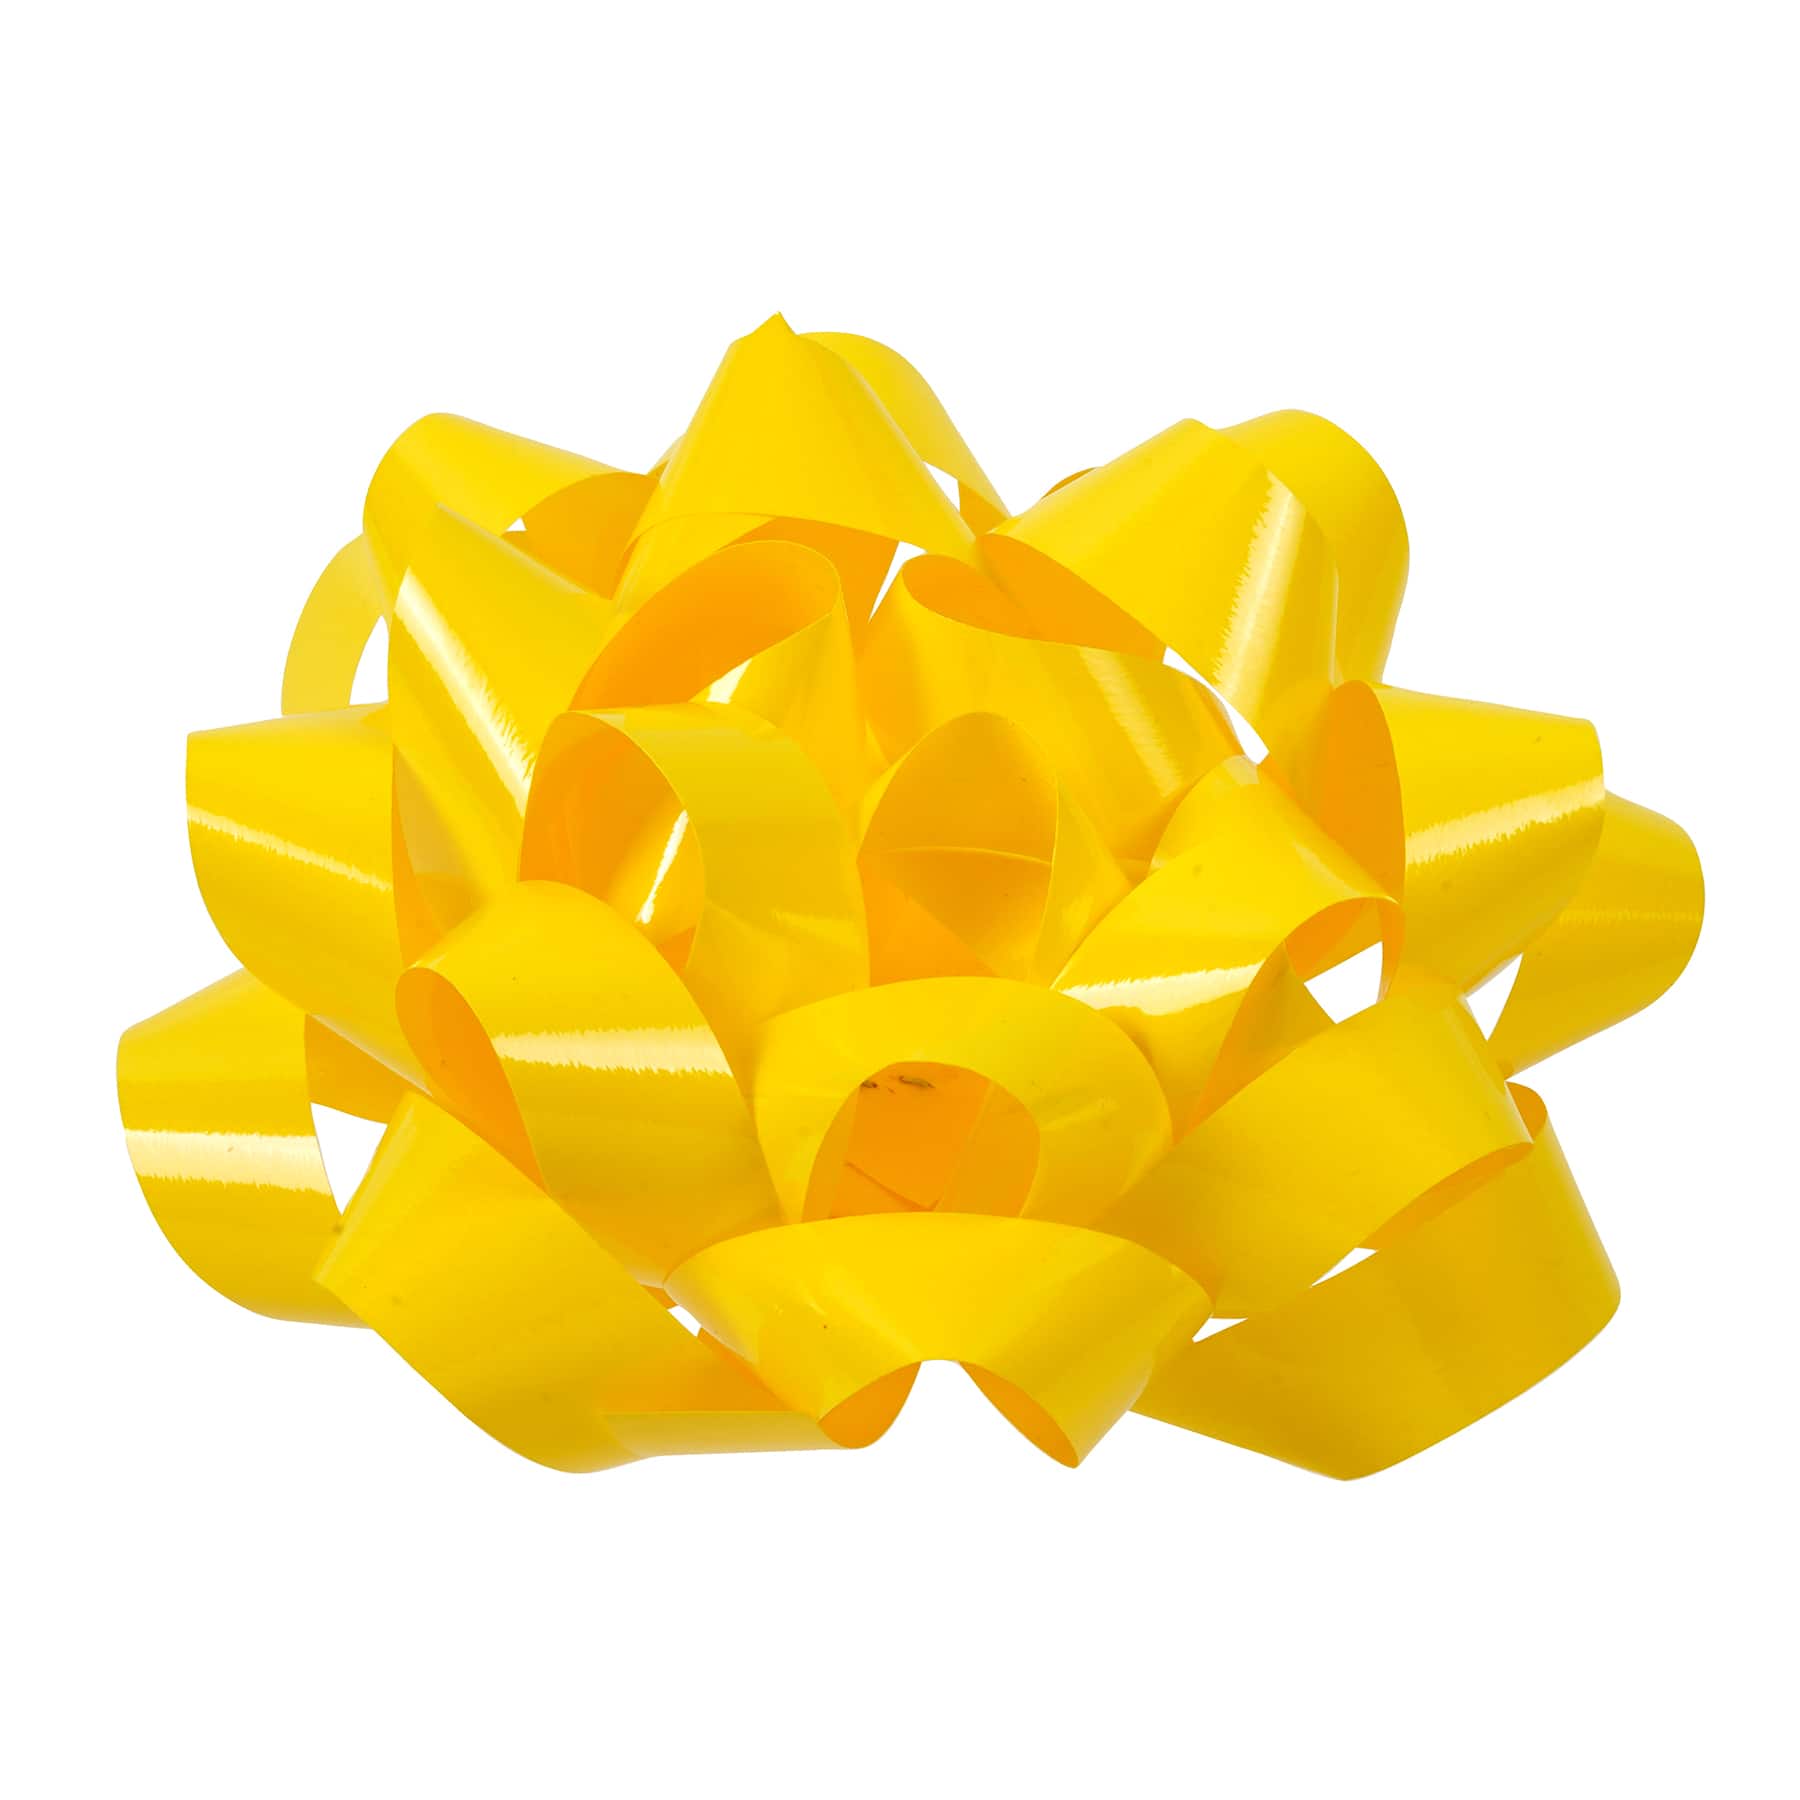  Large Yellow Ribbon Pull Bows - 9 Wide, Set of 6